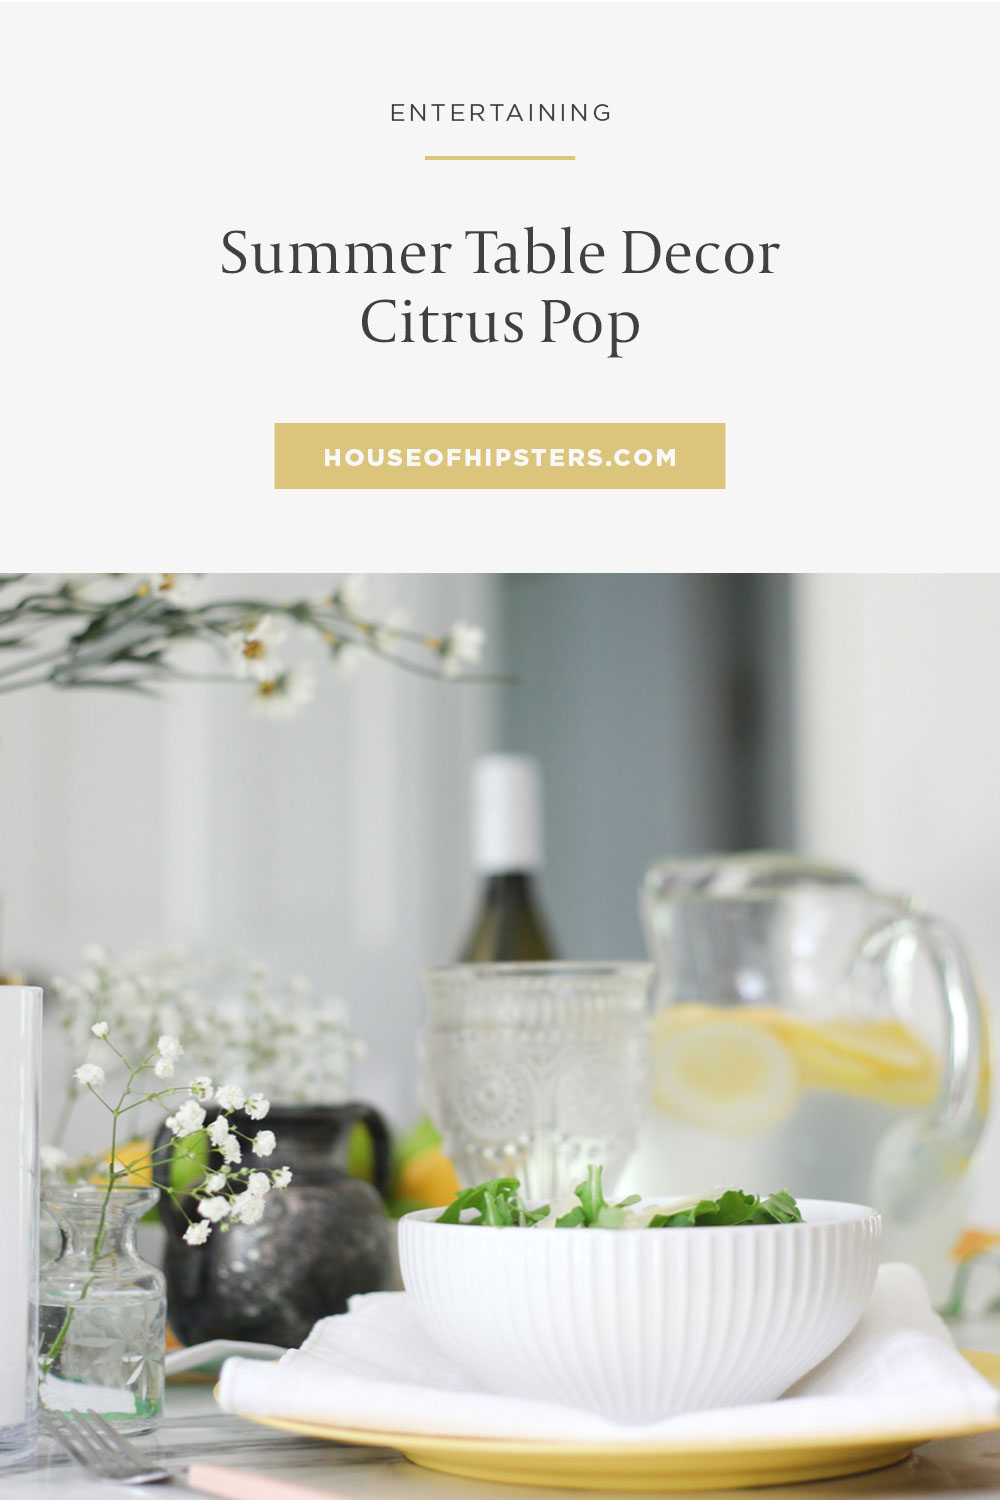 Summer Table Decor - with bright pops of yellow and green